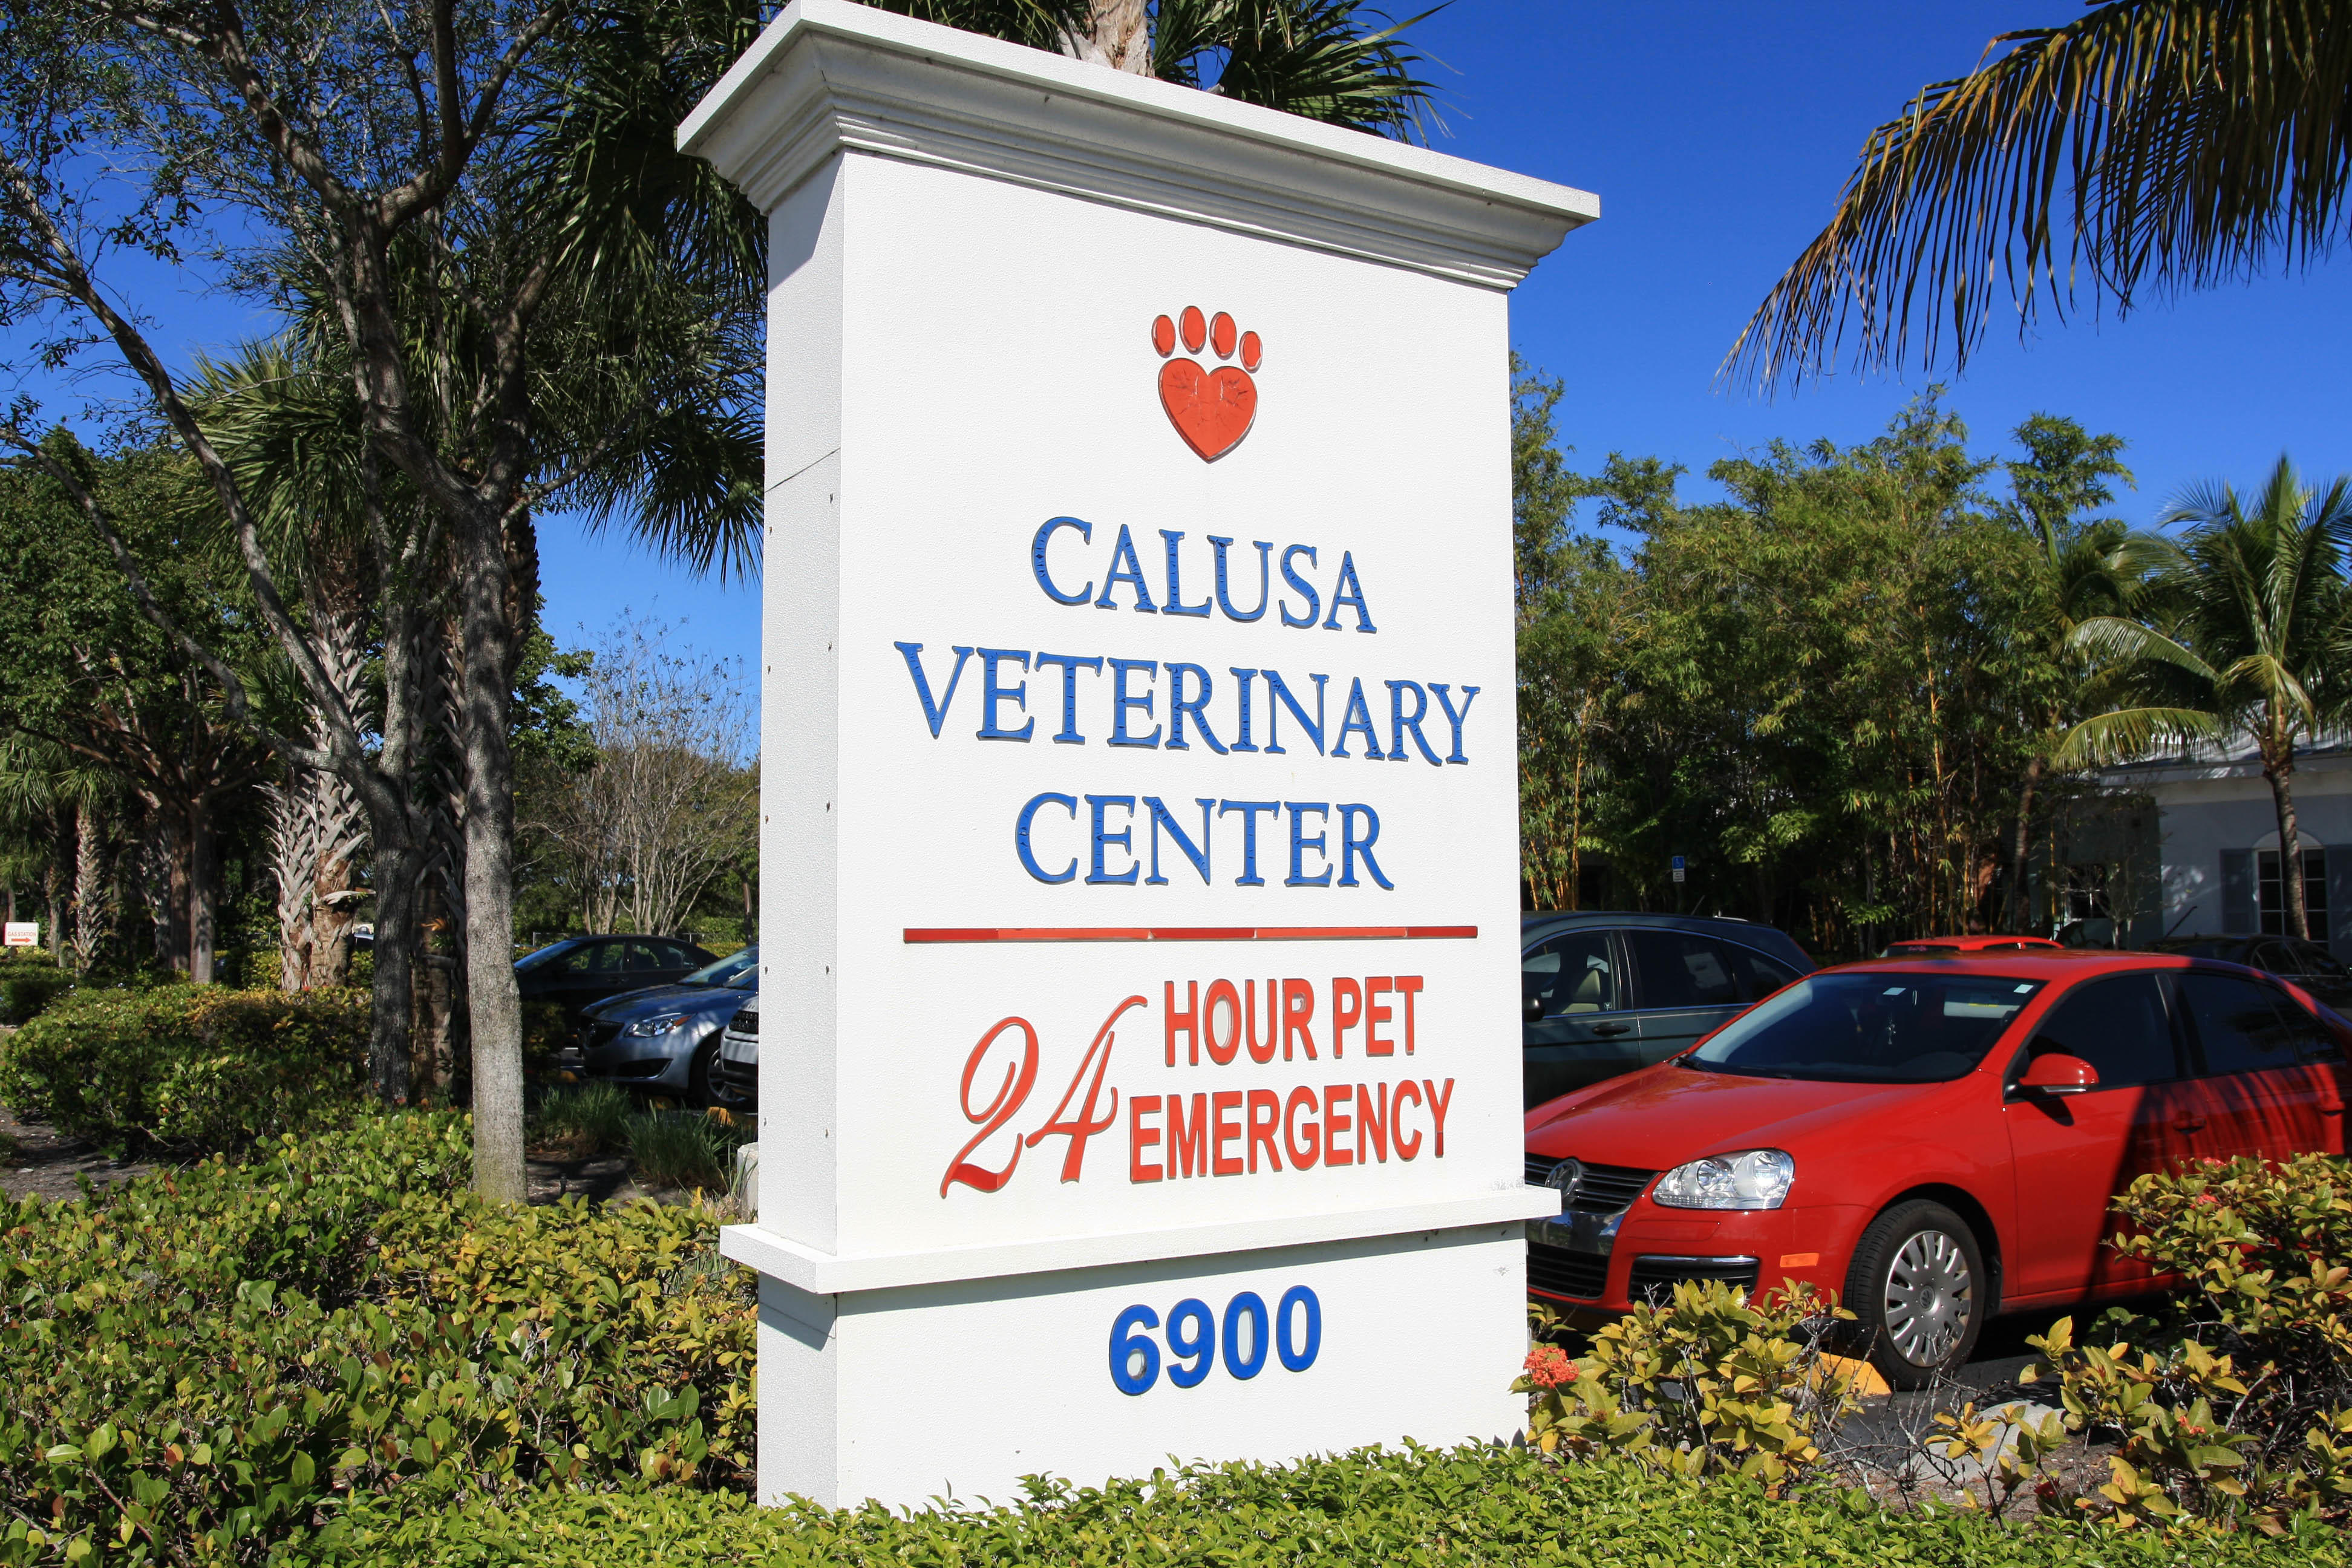 Calusa Veterinary Center is here for your pet 24/7/365. Calusa Veterinary Center Boca Raton (561)999-3000